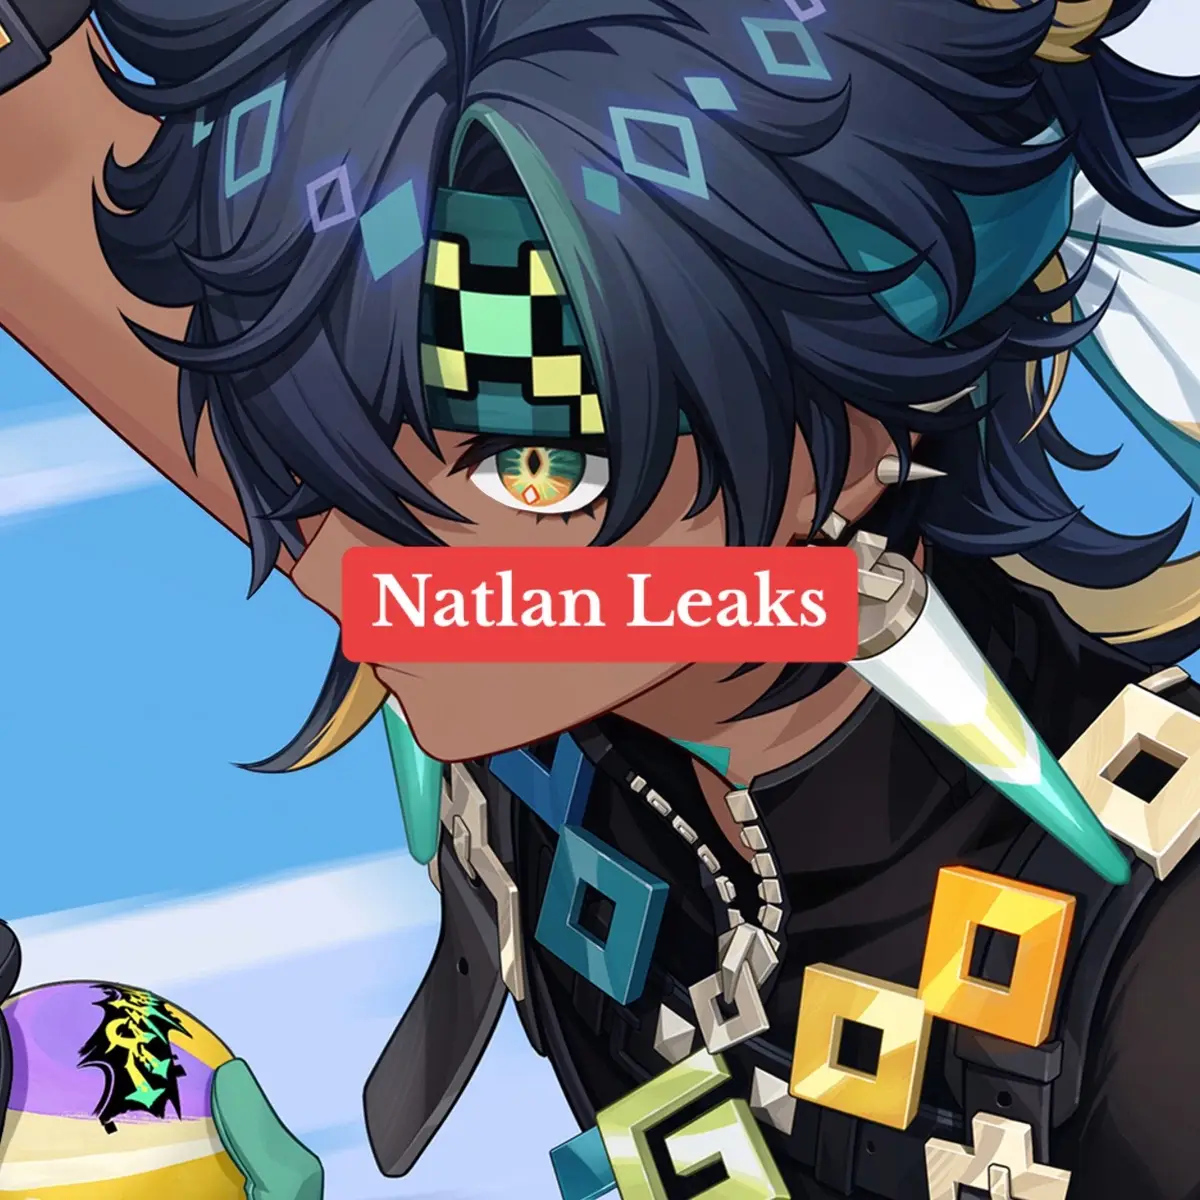 || Why does the person in the namecard have more melanin than the characters || #fy #fyp #viral #xybca #genshin #GenshinImpact #natlan #natlangenshin #natlanleaks